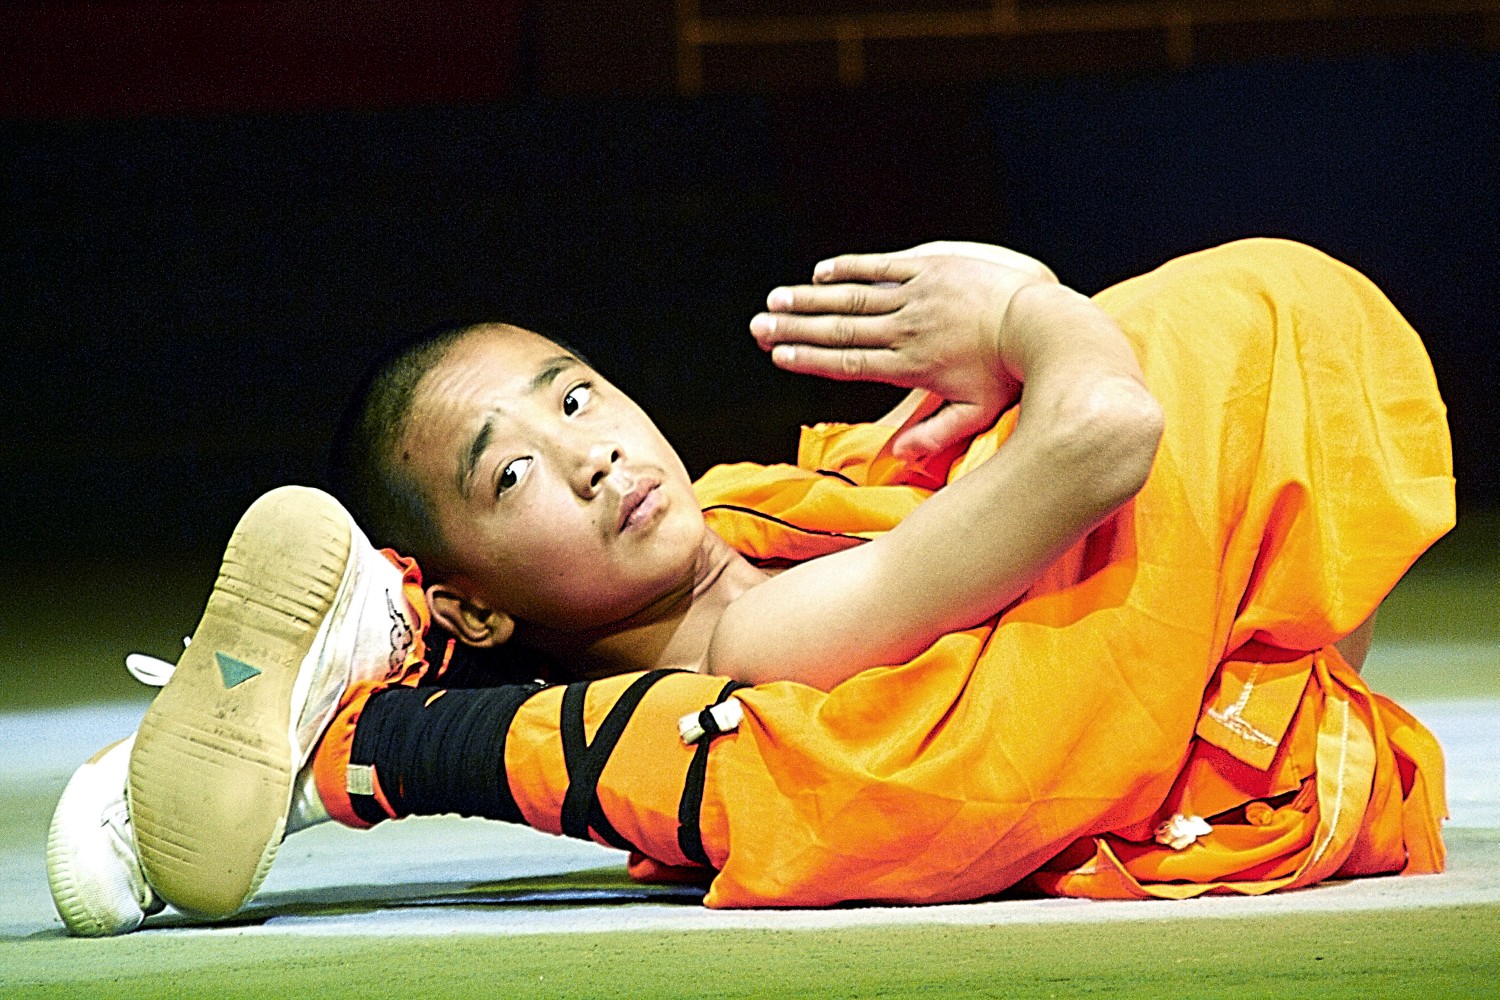 Shaolin monk in an atypical meditation position